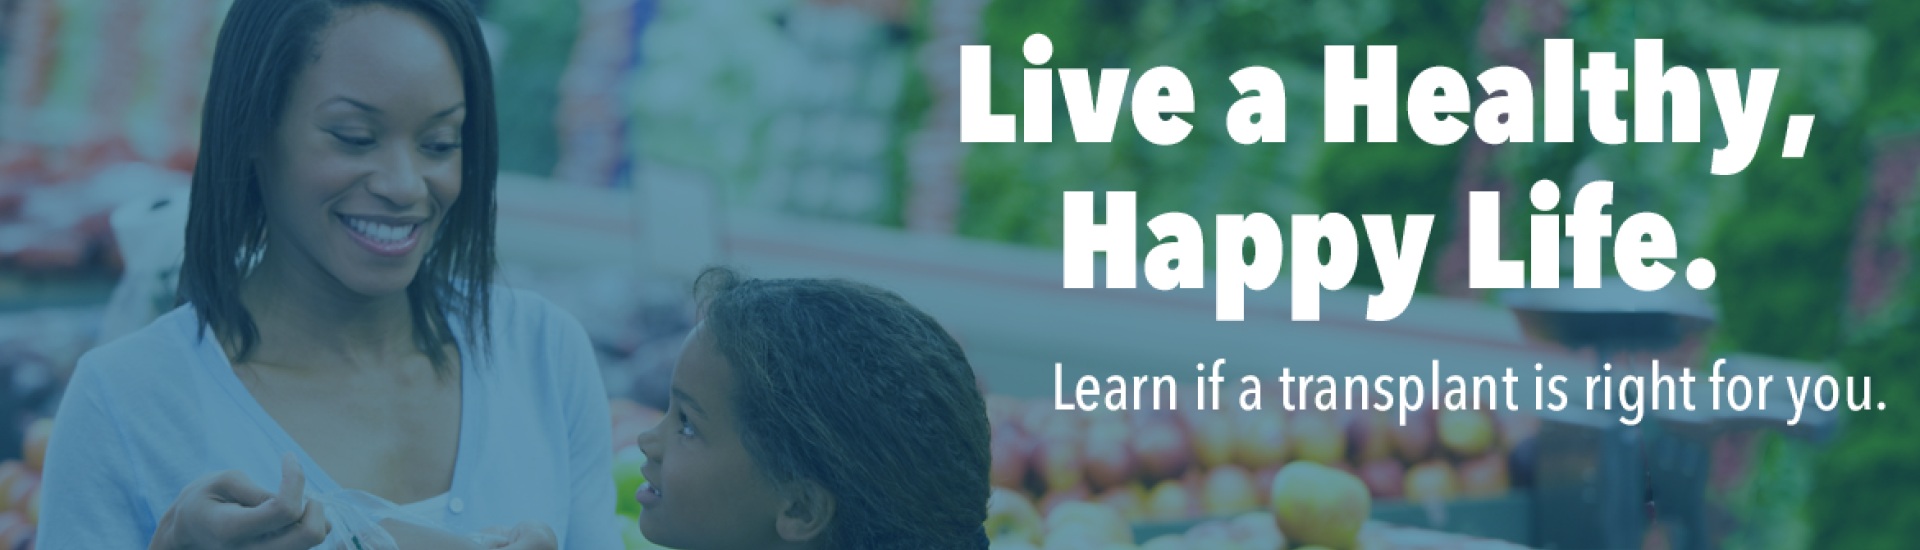 Live a Healthy, Happy Life. Learn if a transplant is right for you